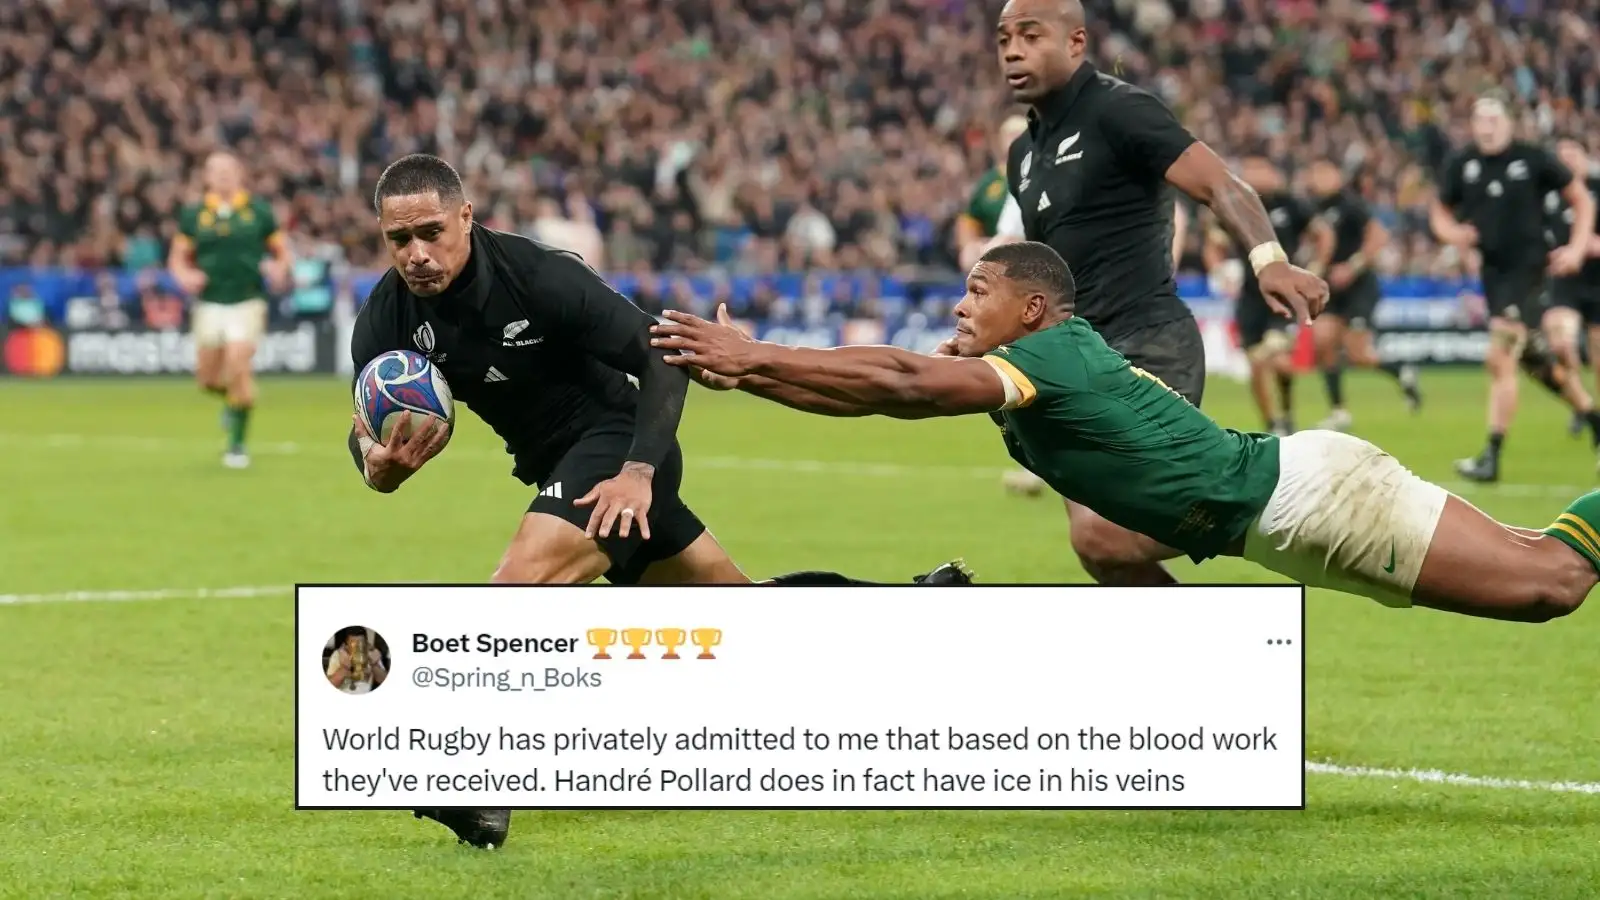 A picture of All Blacks' scrumhalf Aaron Smith scoring a try which is ruled out for a knock-on following a TMO review during the Rugby World Cup 2023 final match with a screenshot of a tweet that reads: "World Rugby has privately admitted to me that based on the blood work they've received. Handré Pollard does in fact have ice in his veins"